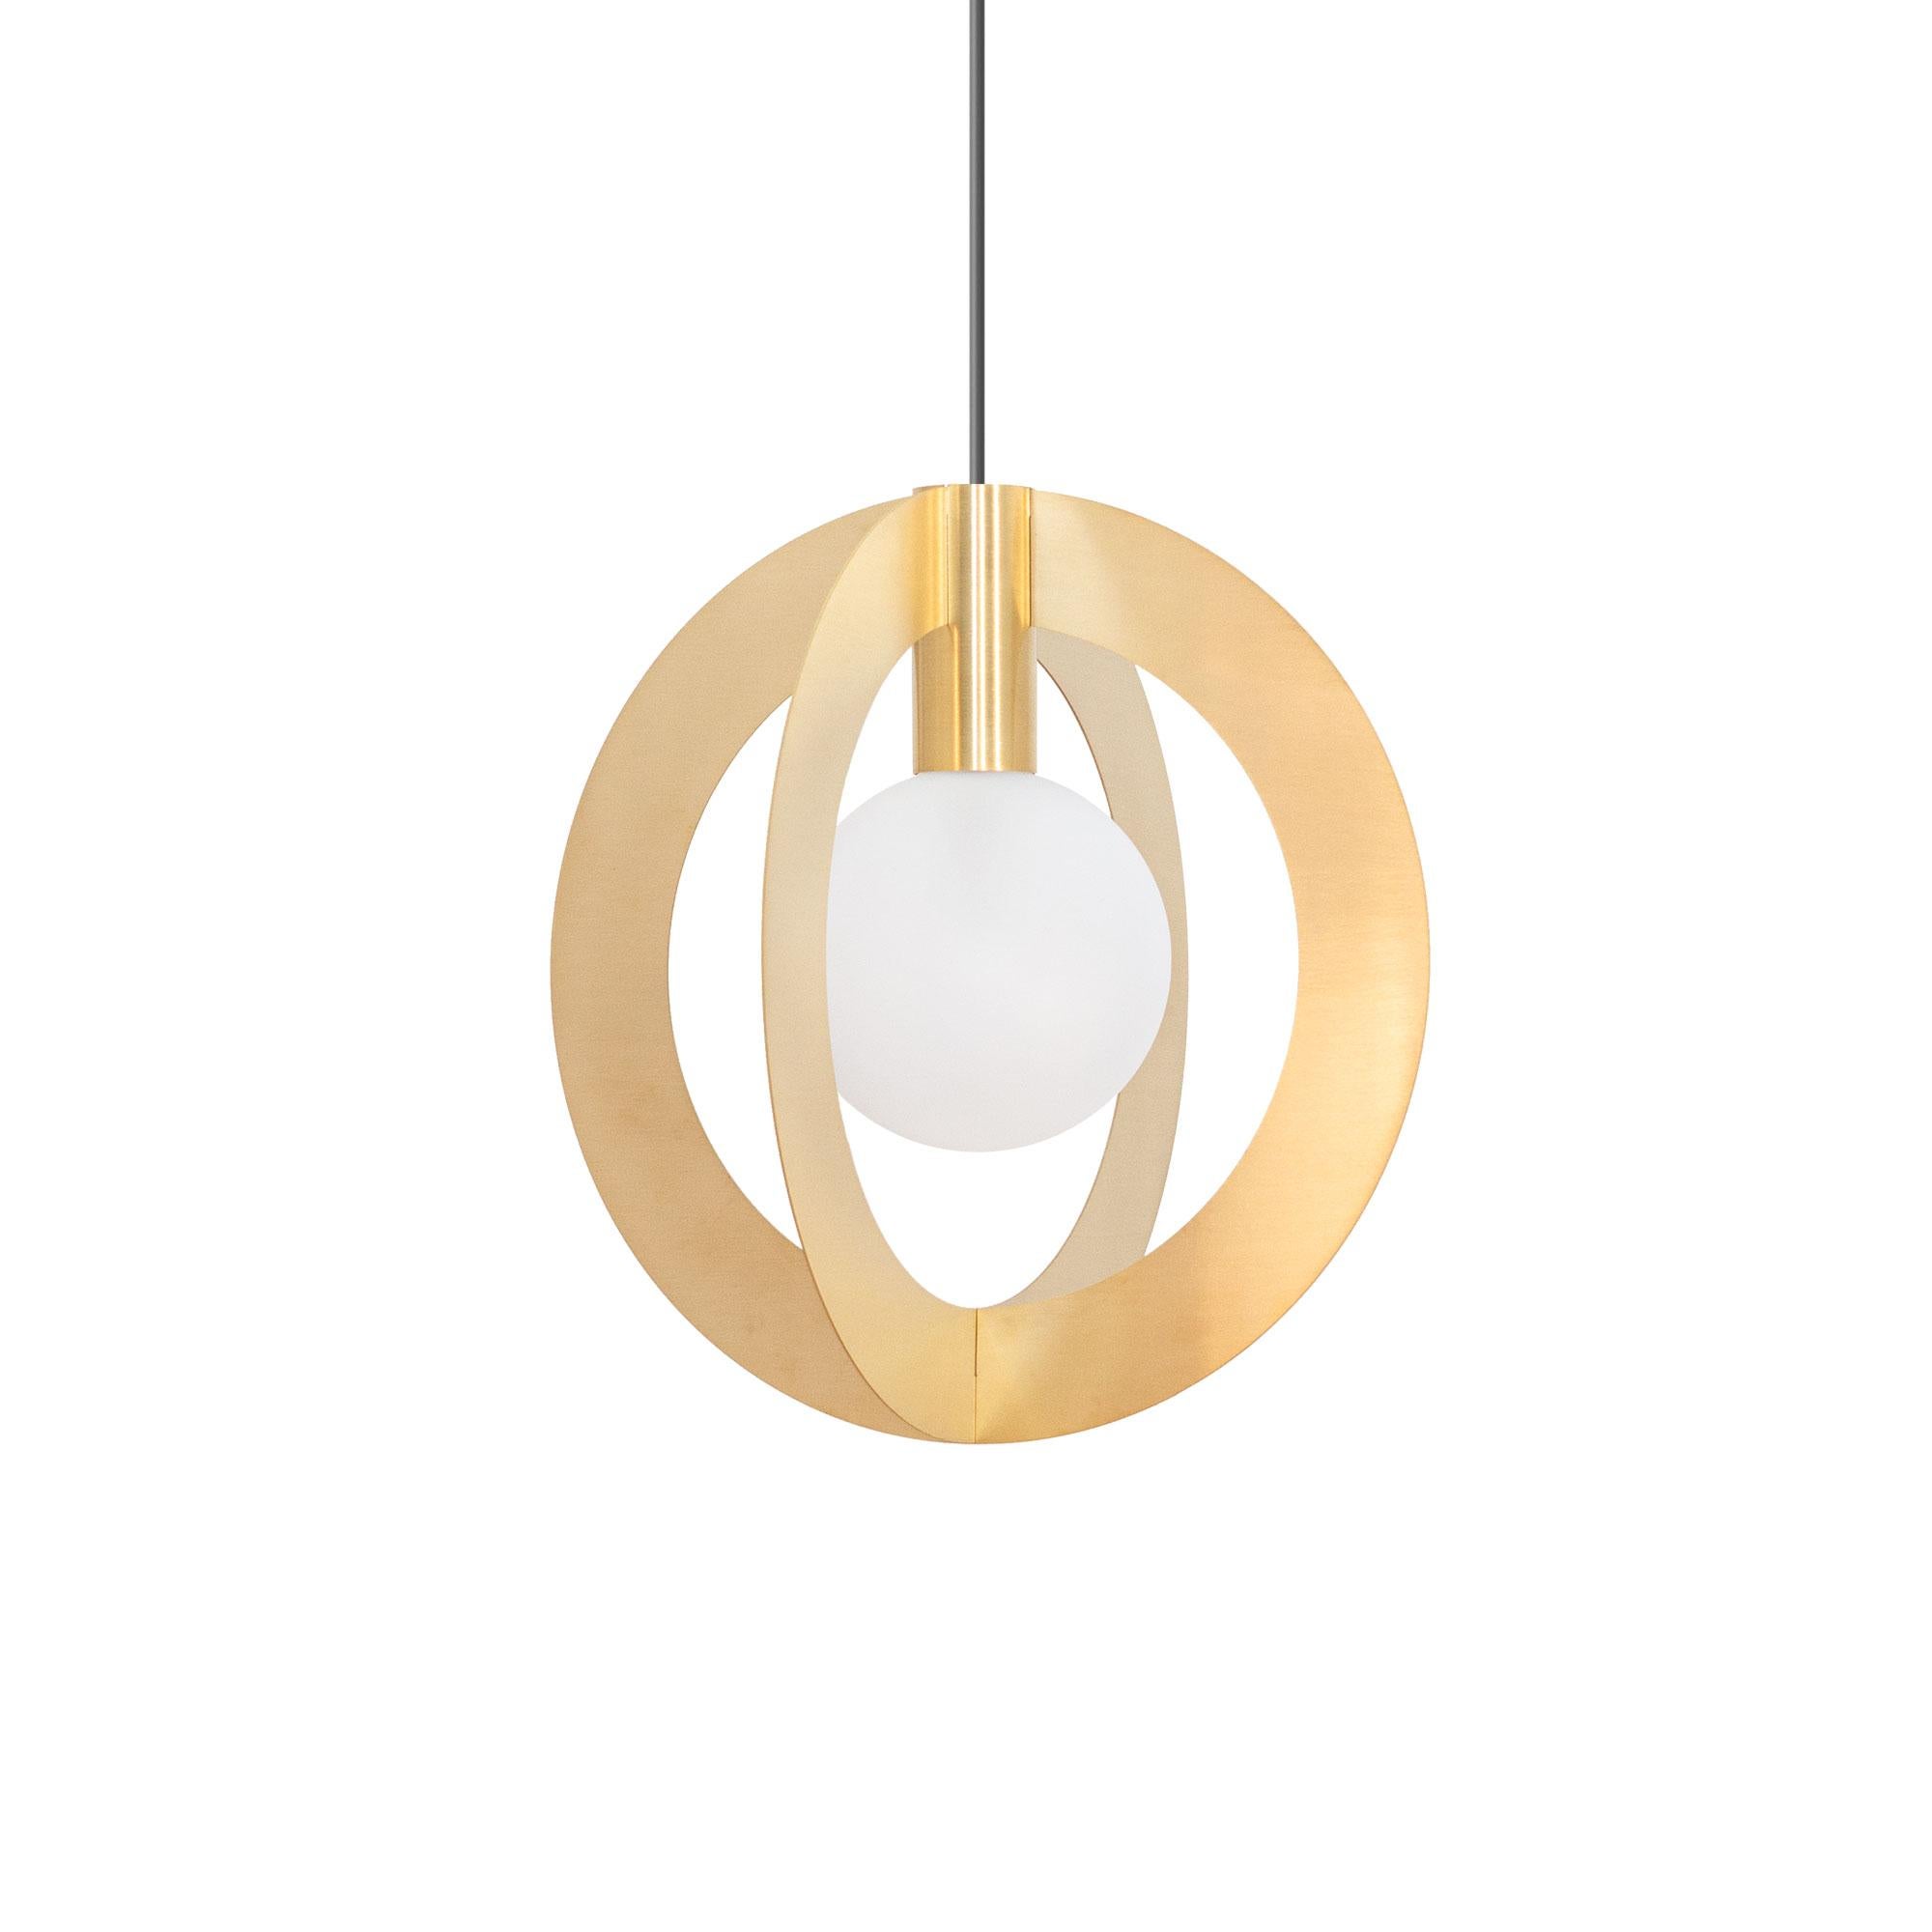 Copper diaradius big light by Atris
Materials: copper, satin glass
Also available in steel and brass.
Dimensions: H 39 x D 39 cm
Also available in H 32 x D 32 cm.

We are the preachers of honest design, and we like to emphasize the beauty of